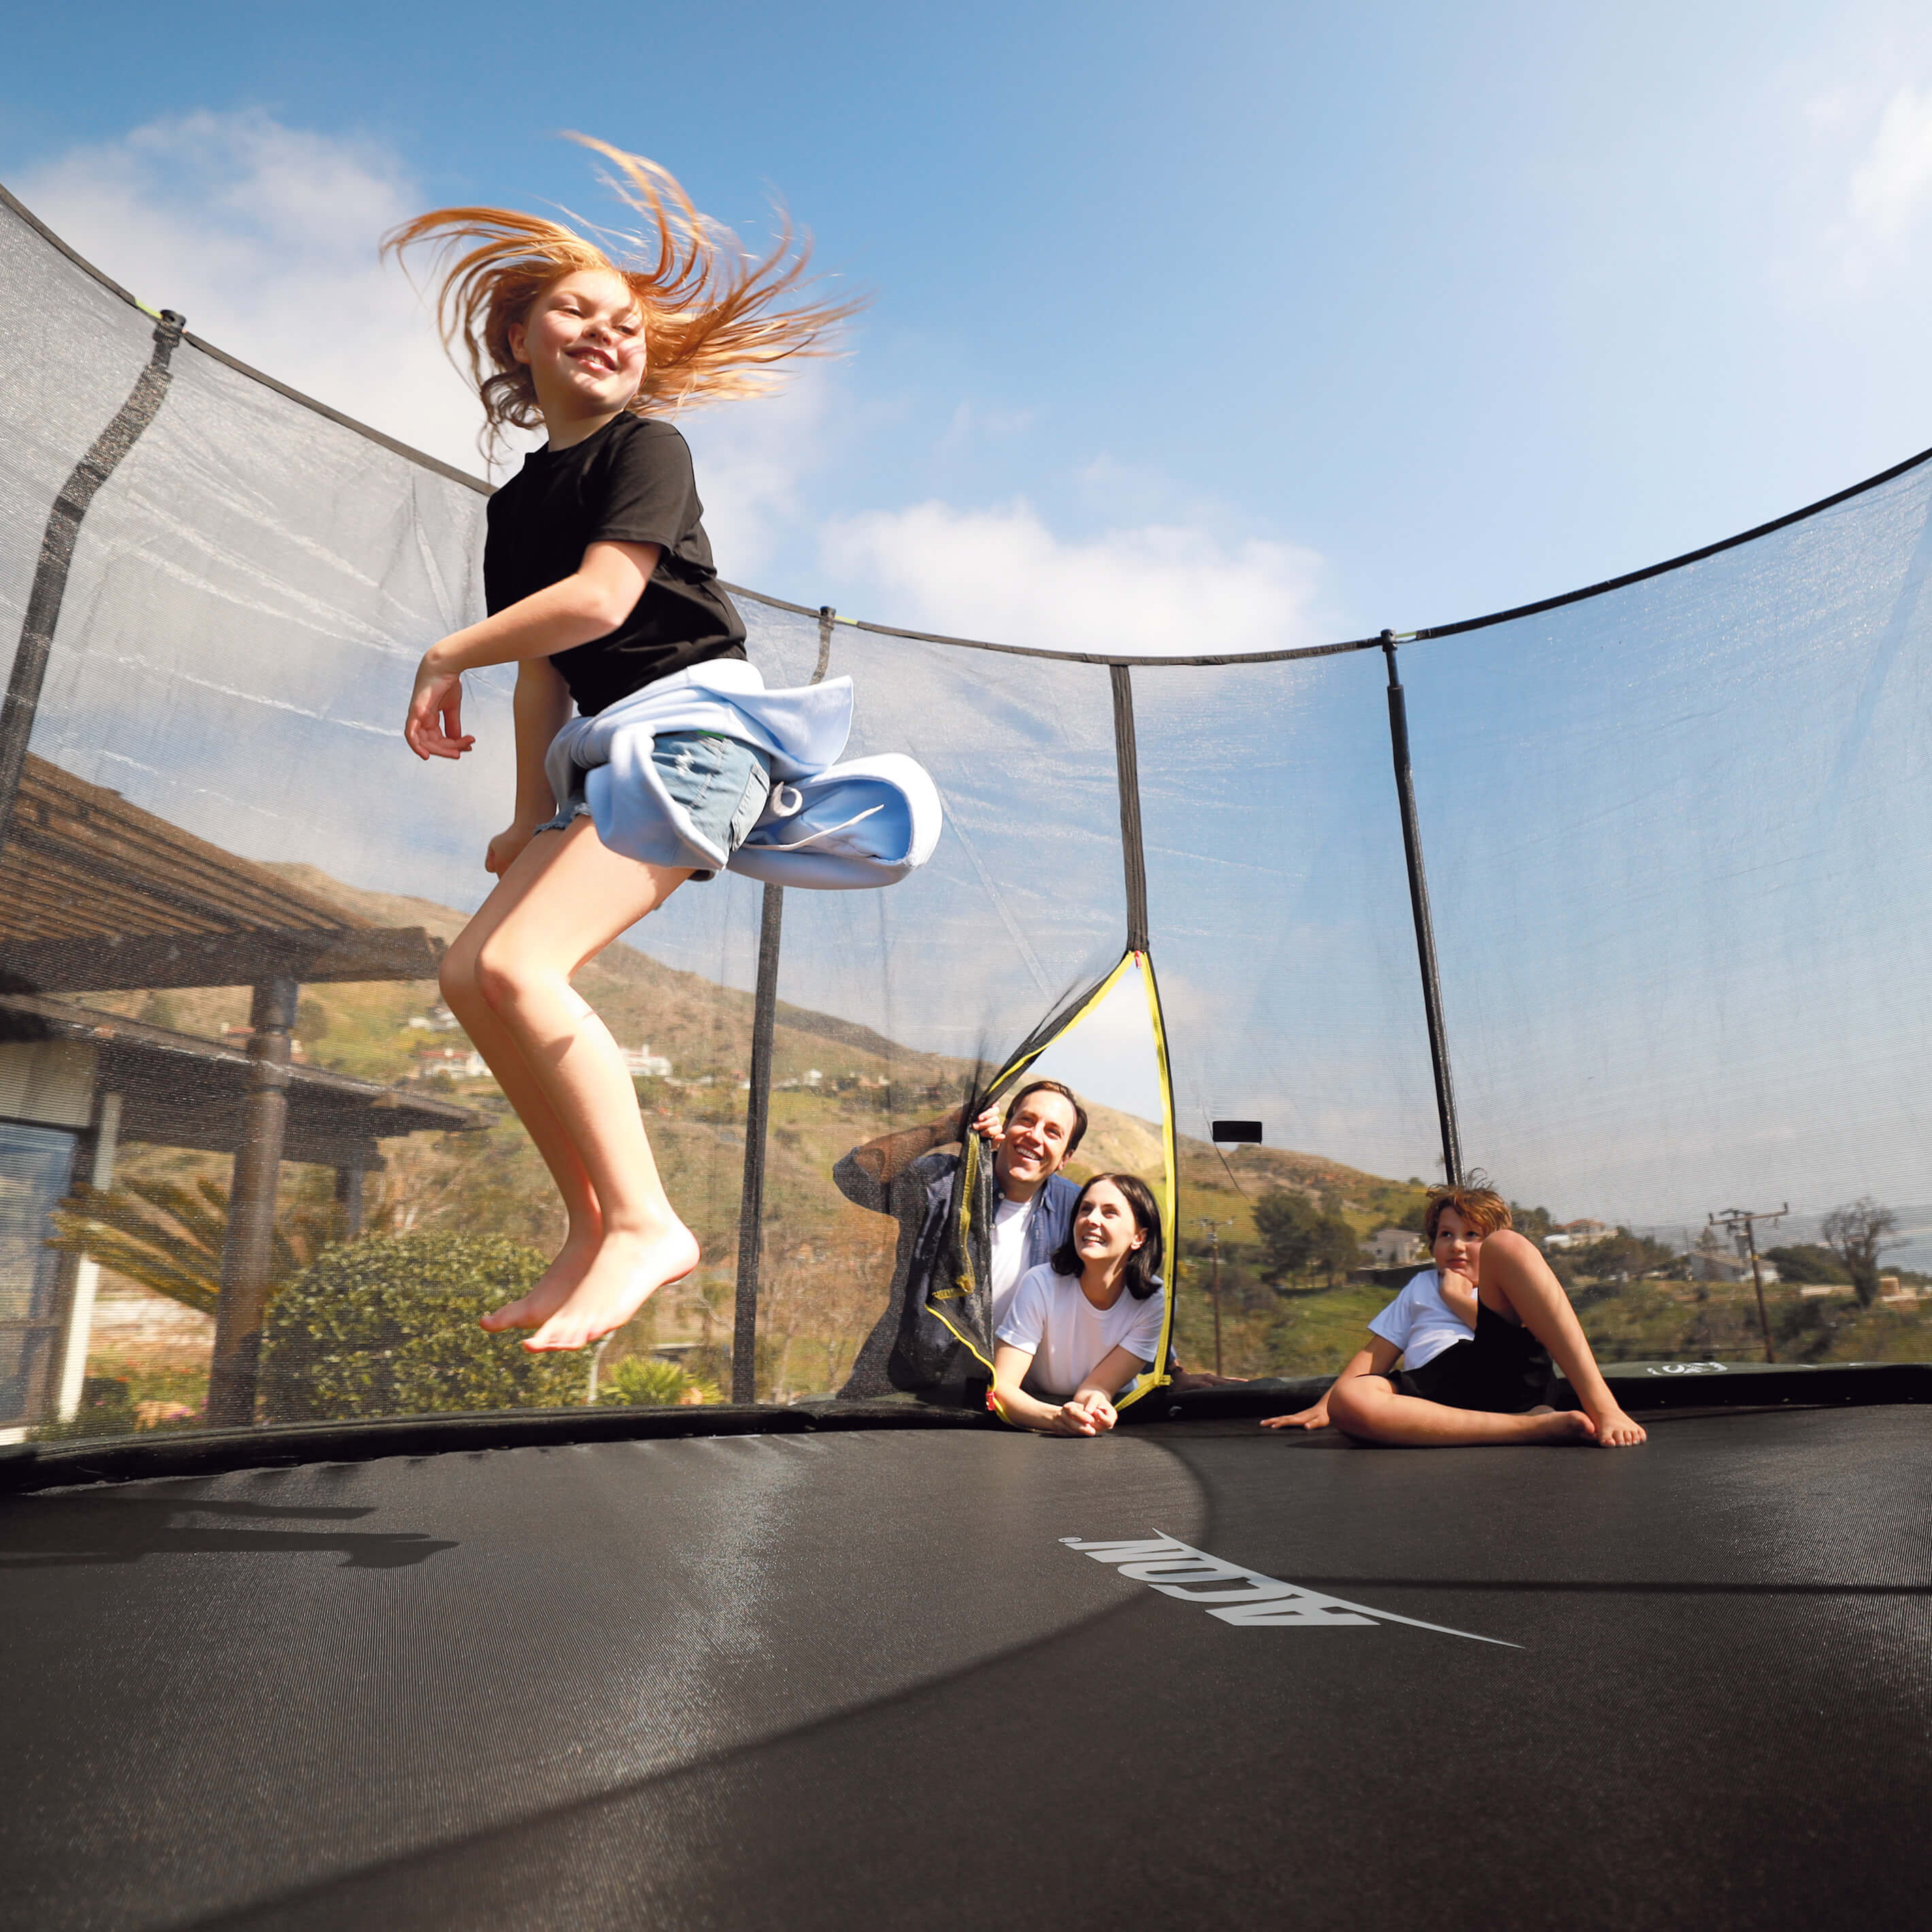 Girl jumps on an Acon trampoline, family watches.